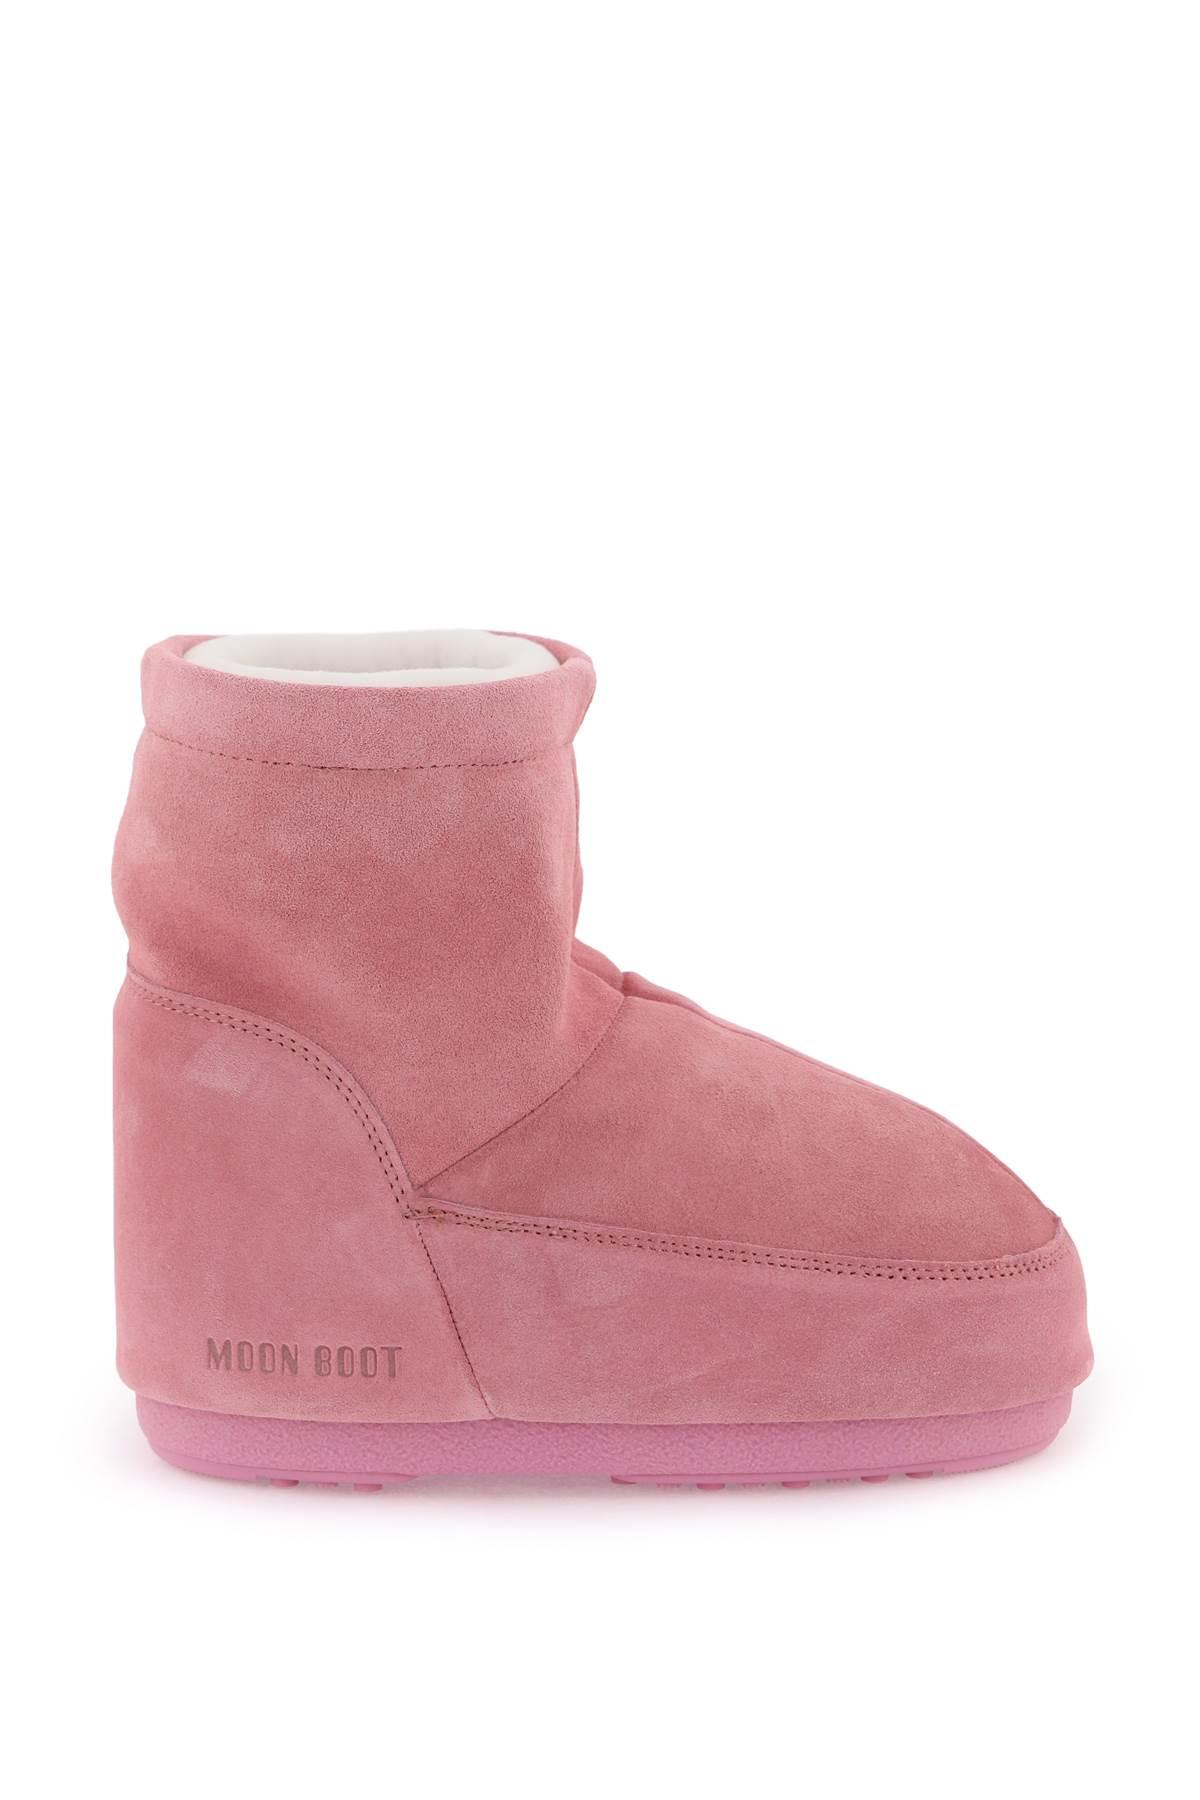 Moon Boot Pink Icon Low Snow Boots